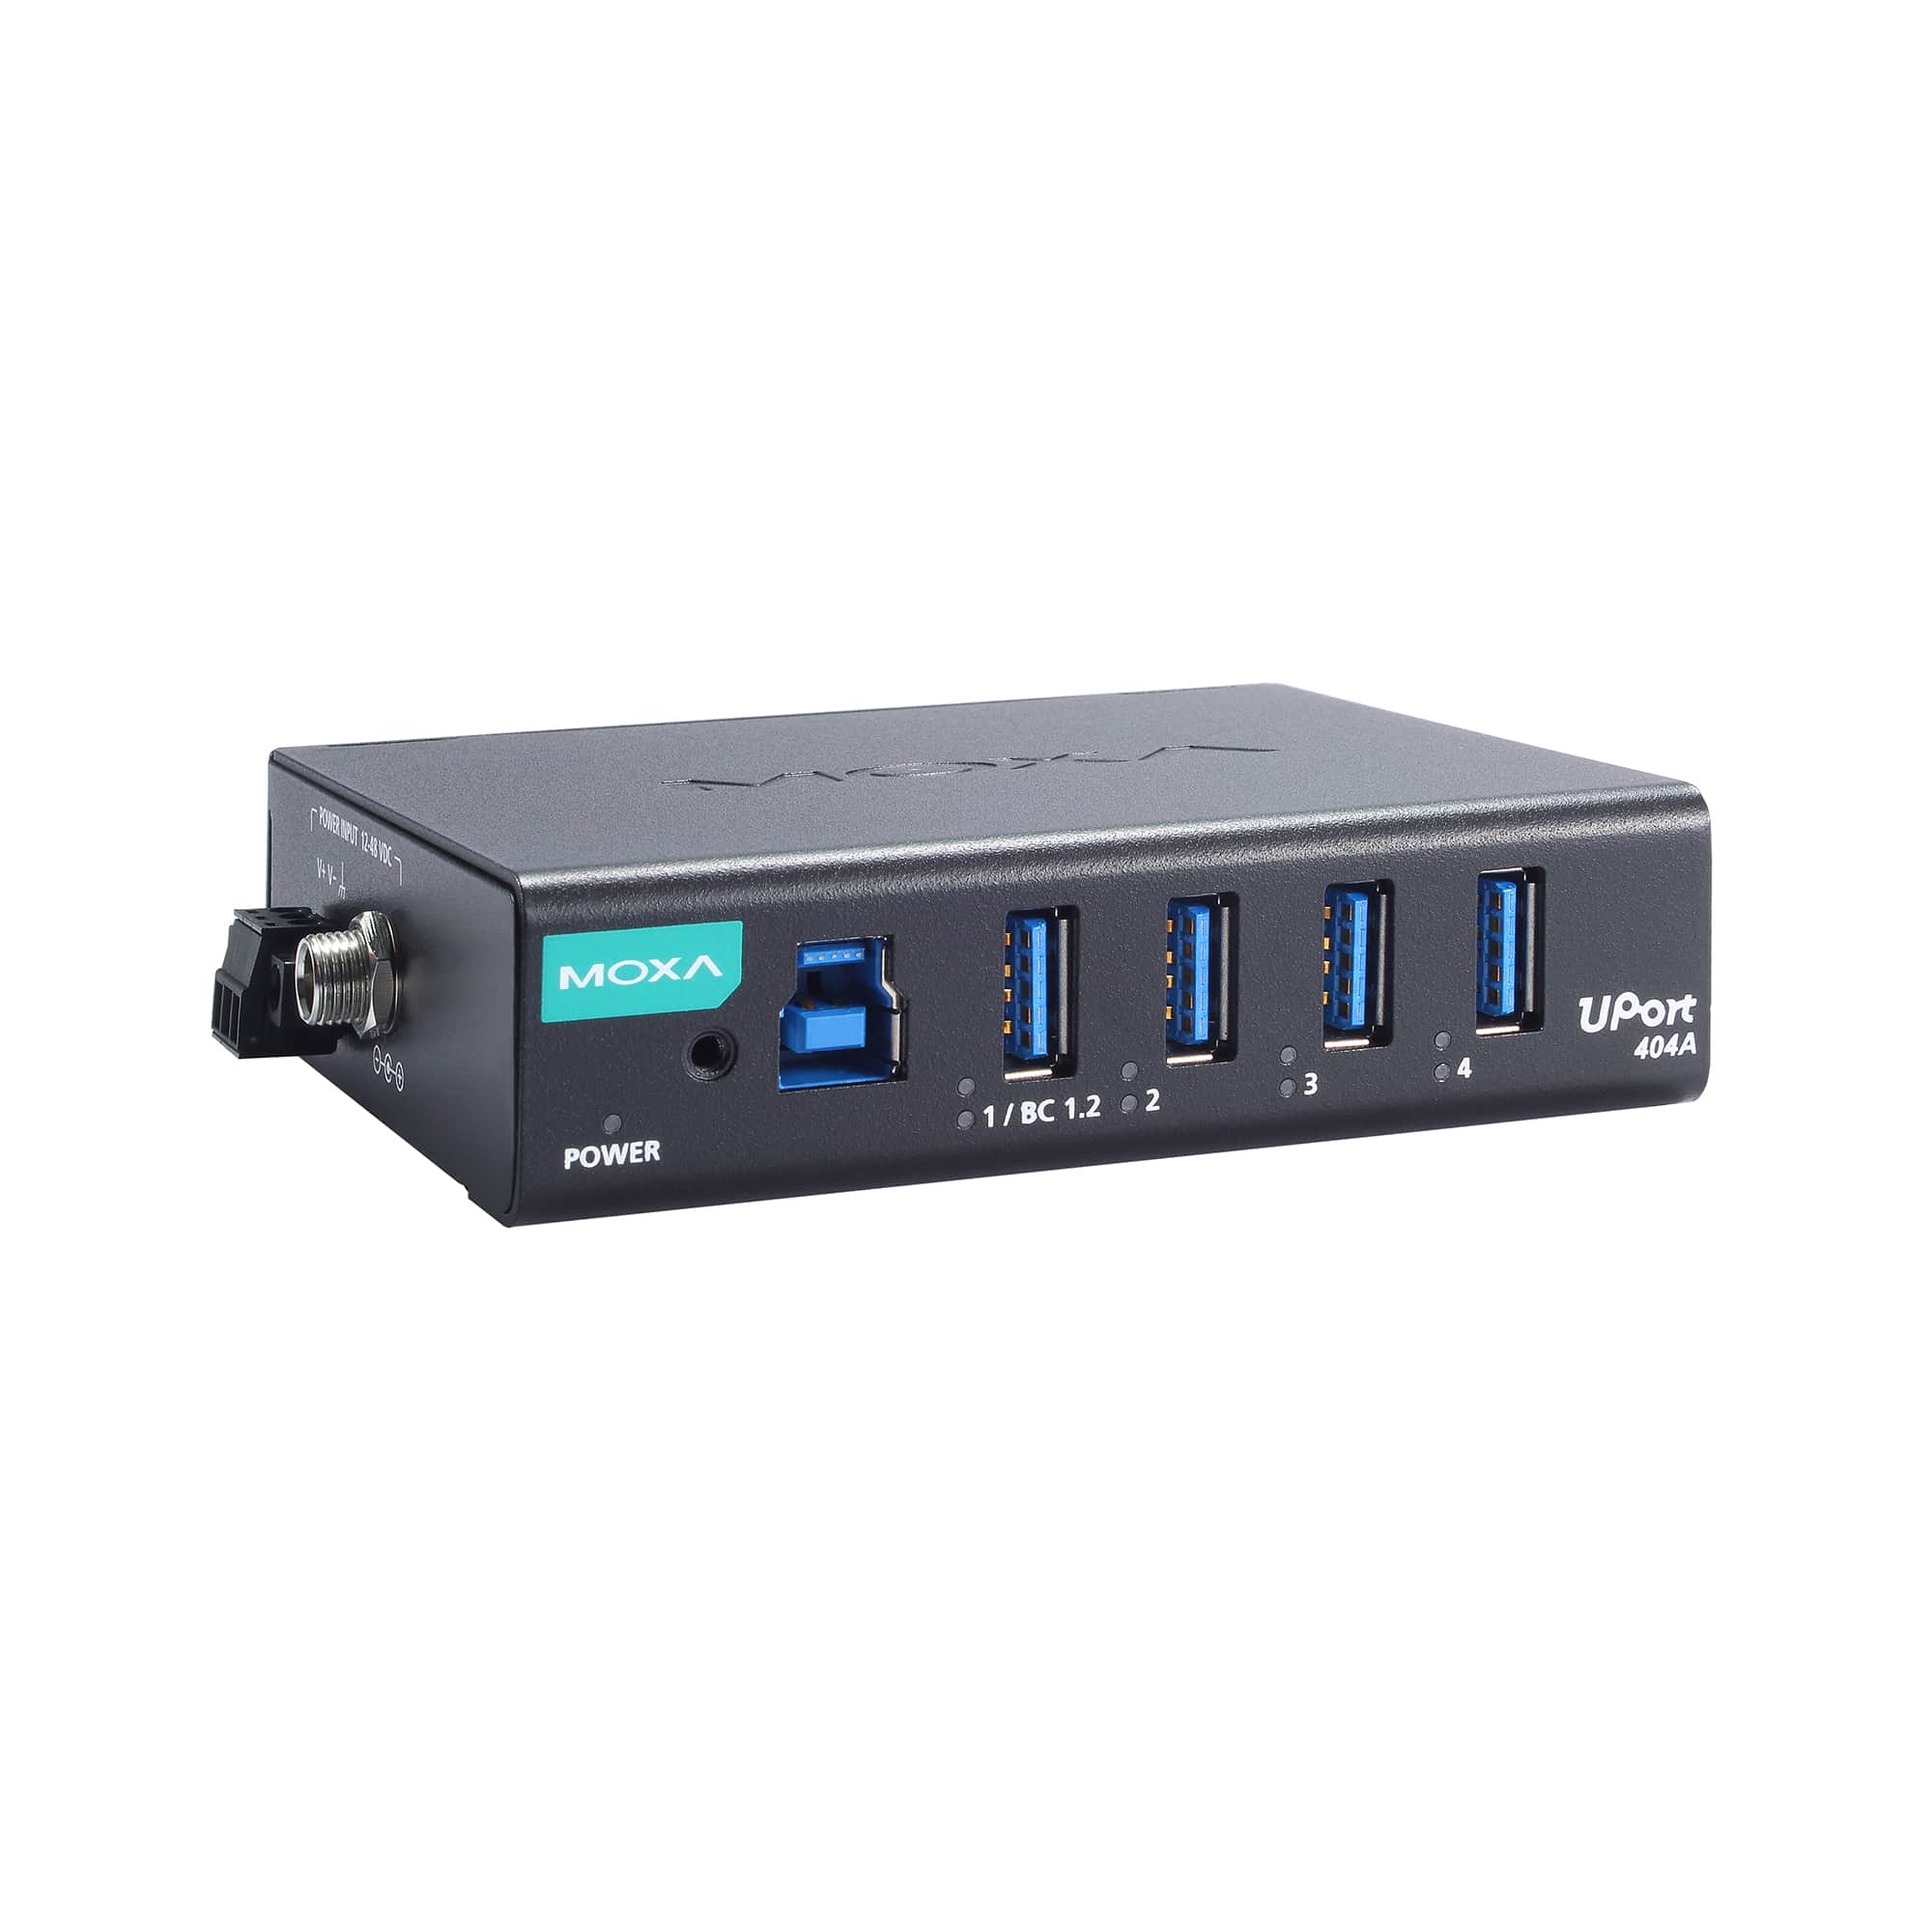  USB UPort 404A